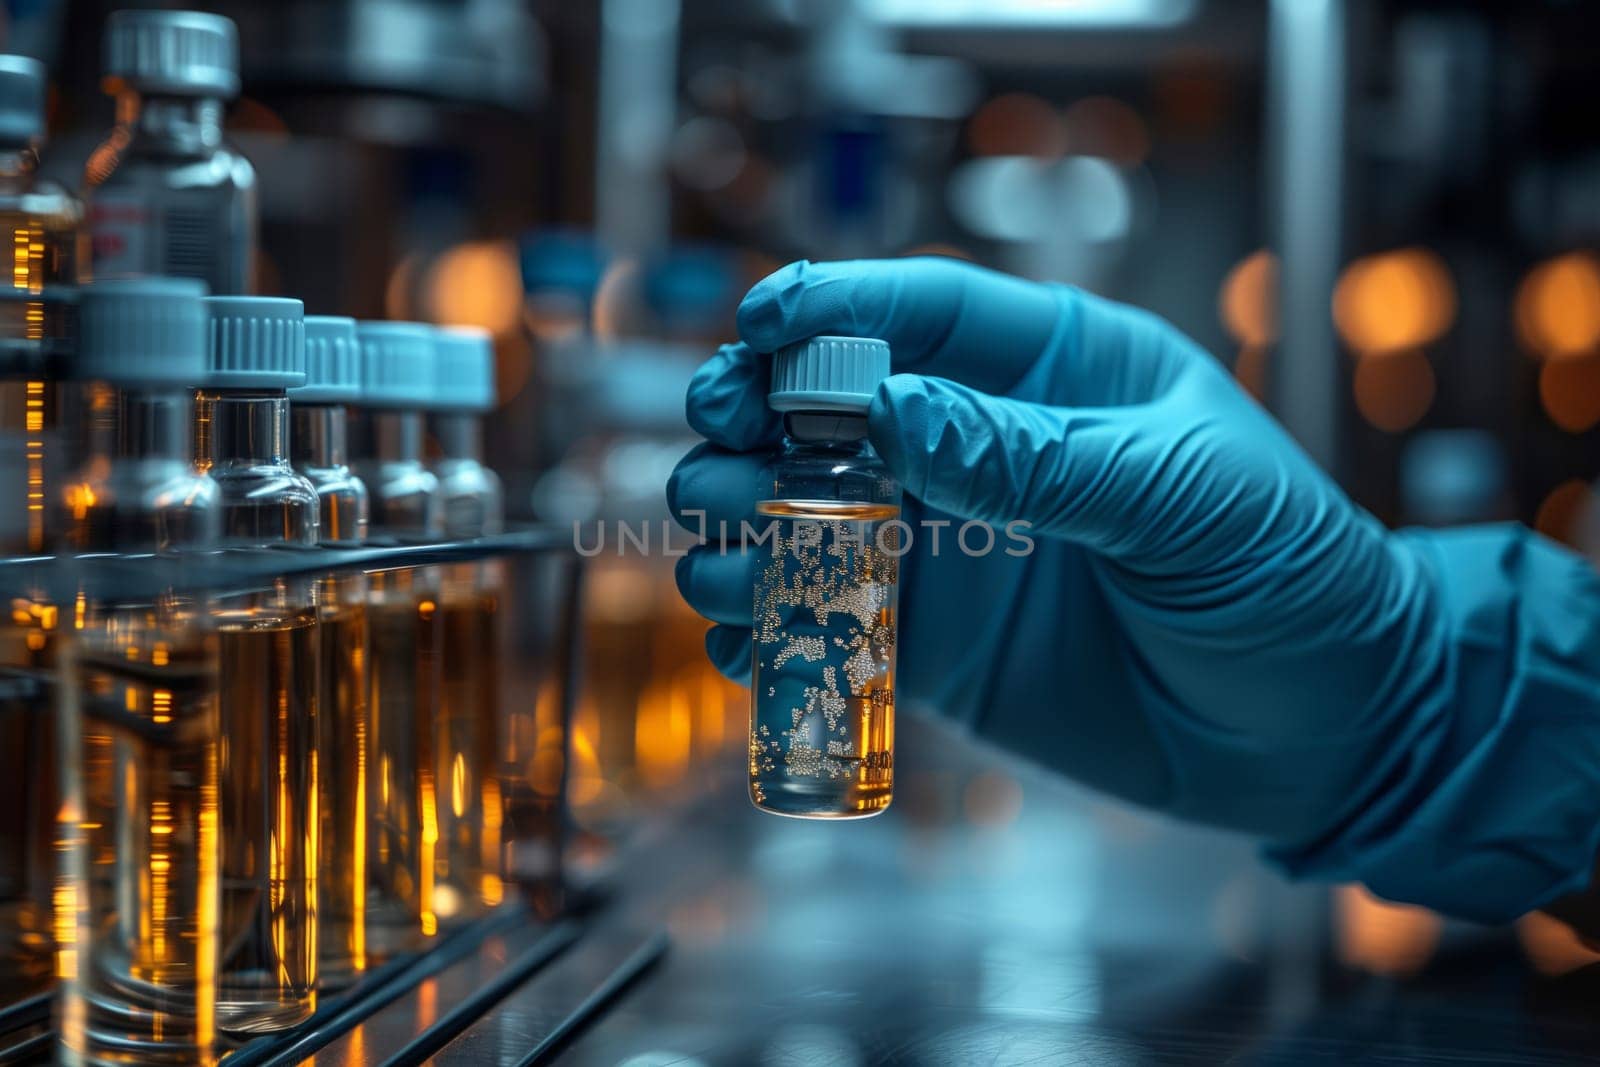 In the lab, a scientist is holding a small bottle of electric blue liquid by richwolf